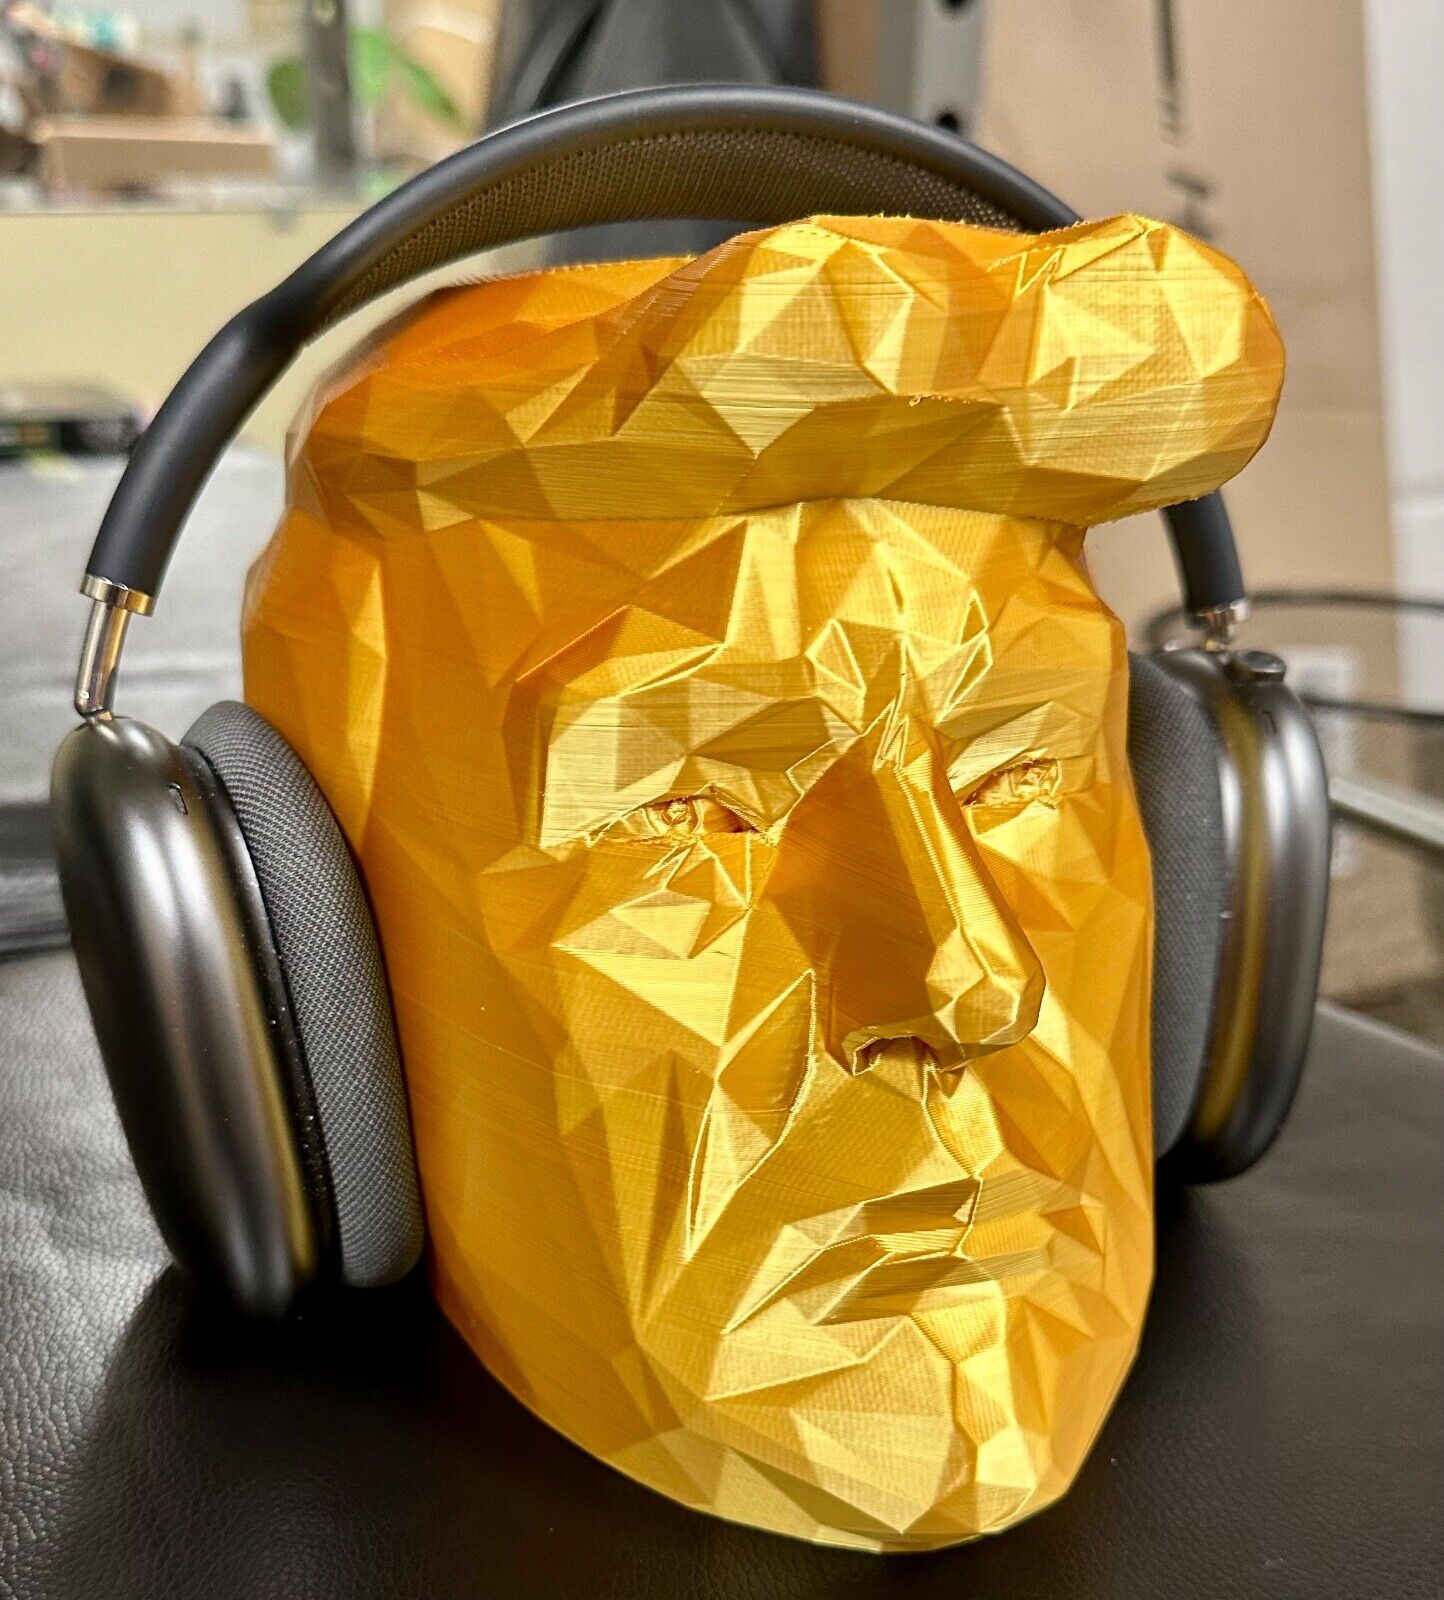 Stylized Sculpture of Donald Trump's Head - HUUUGE (Extra Large)